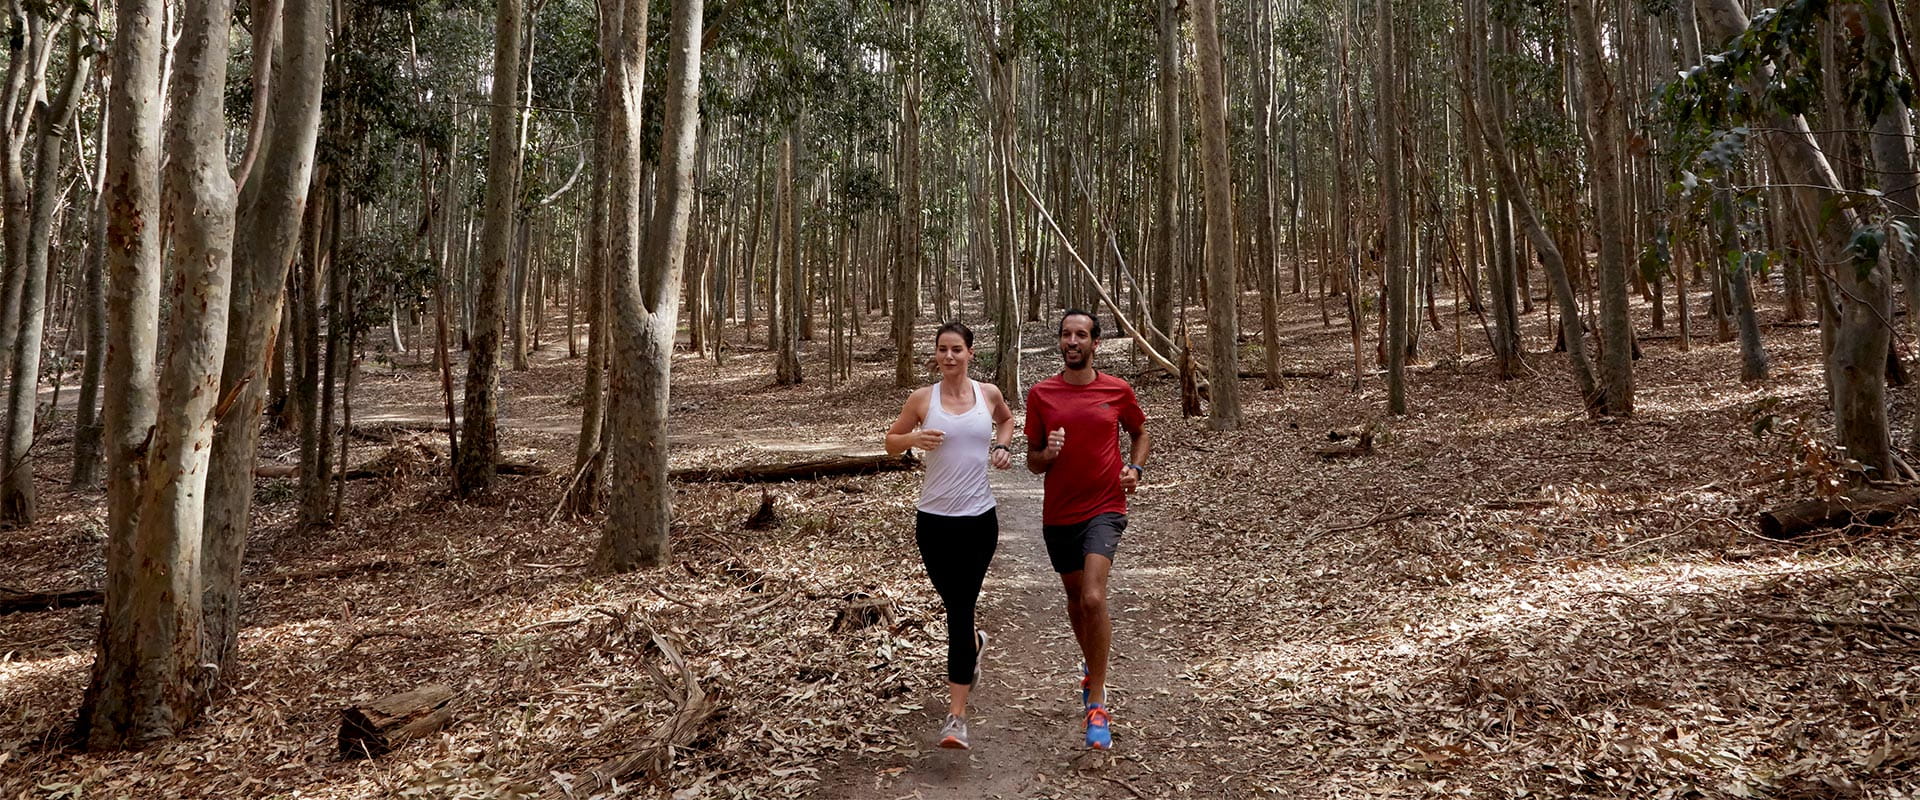 A woman and man, both dressed in excercise clothing, run together along a dirt path surrounded by trees.